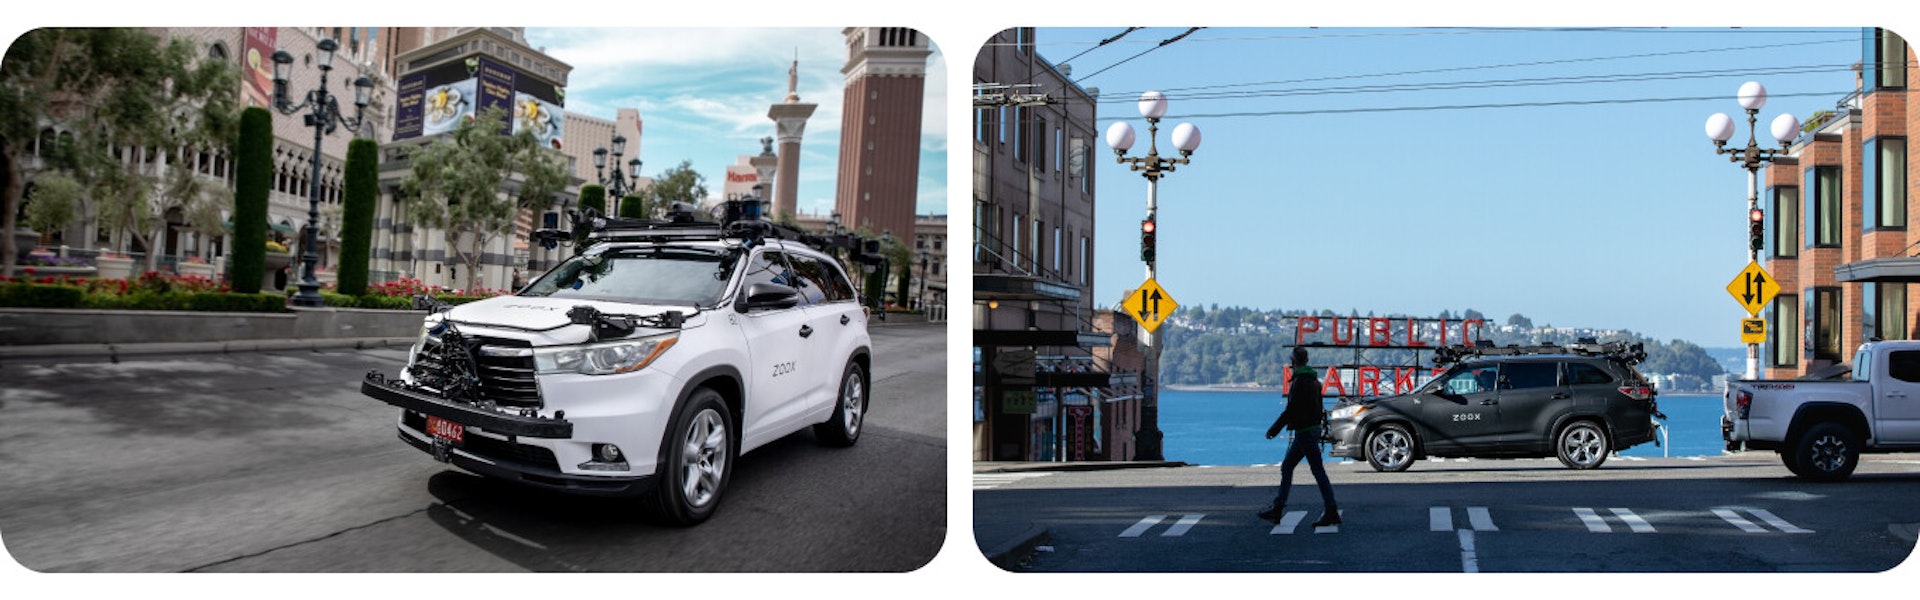 zoox test vehicle white and black toyota highlander in las vegas and seattle